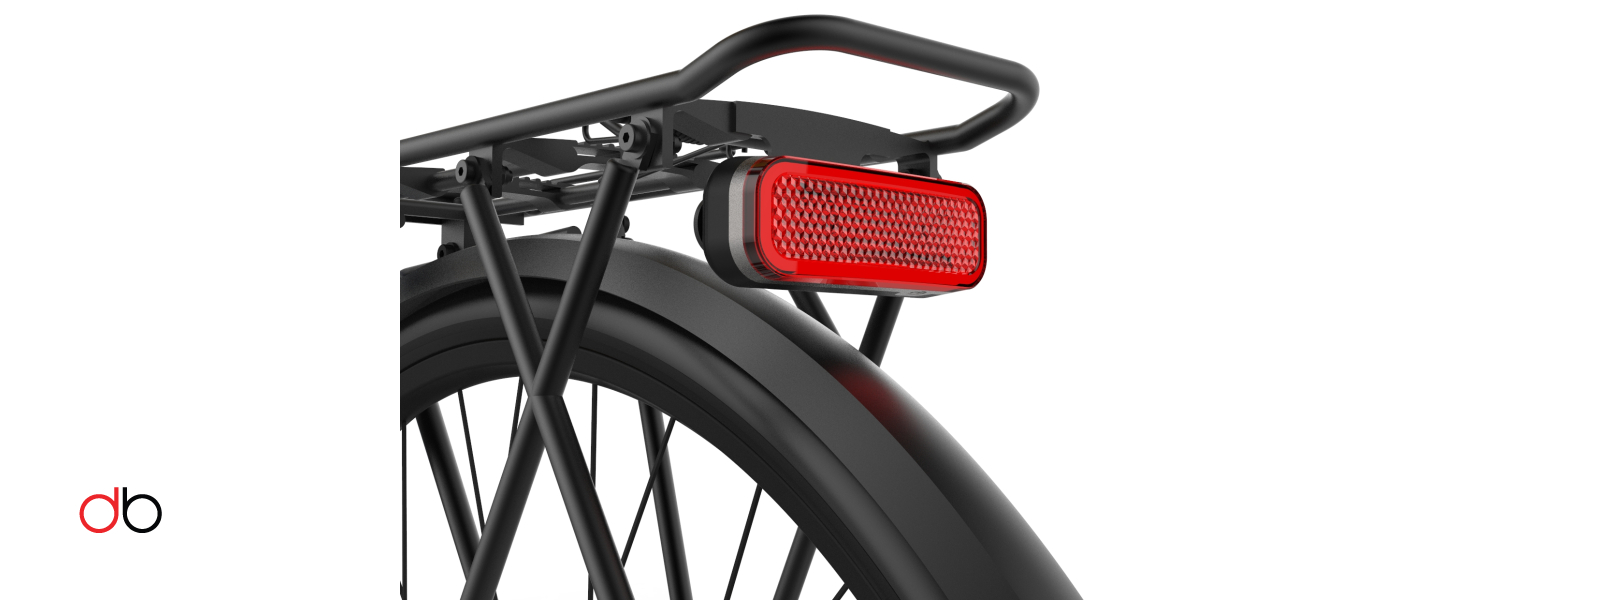 Bikespark rearlight - Read the review